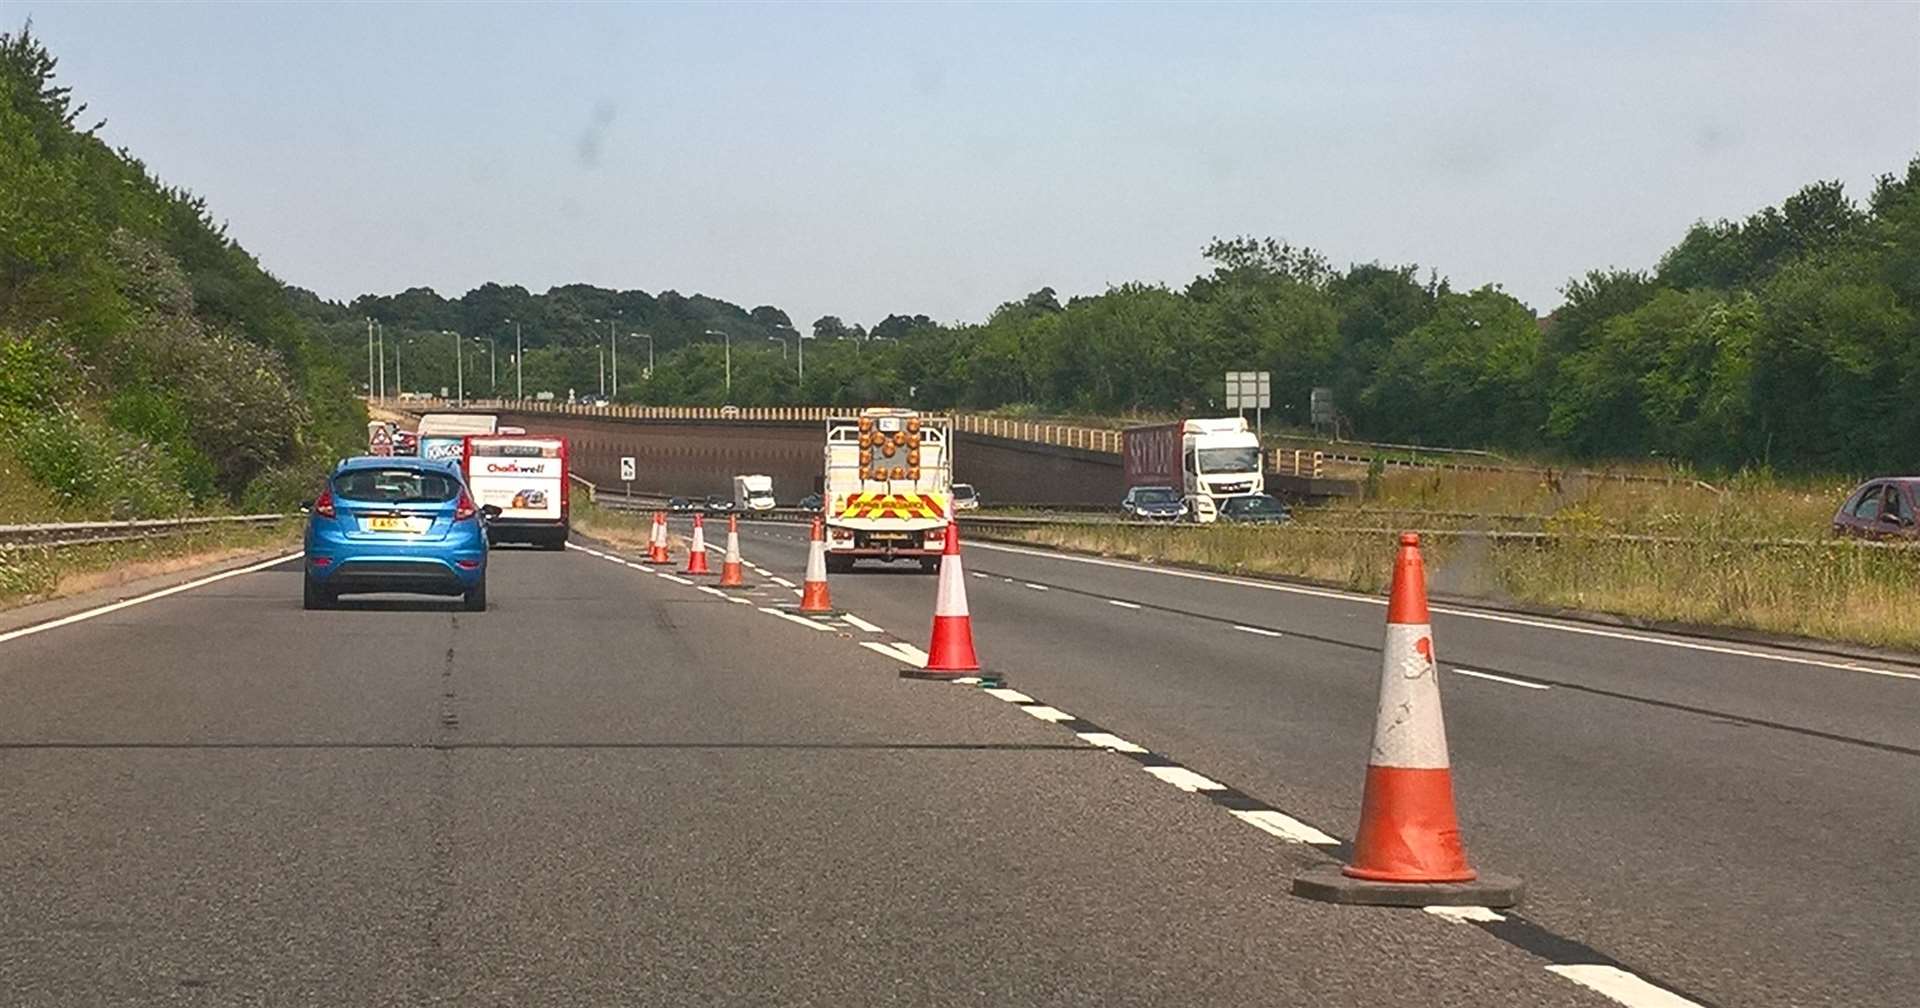 The A249 was closed at Key Street after a lorry jack-knifed